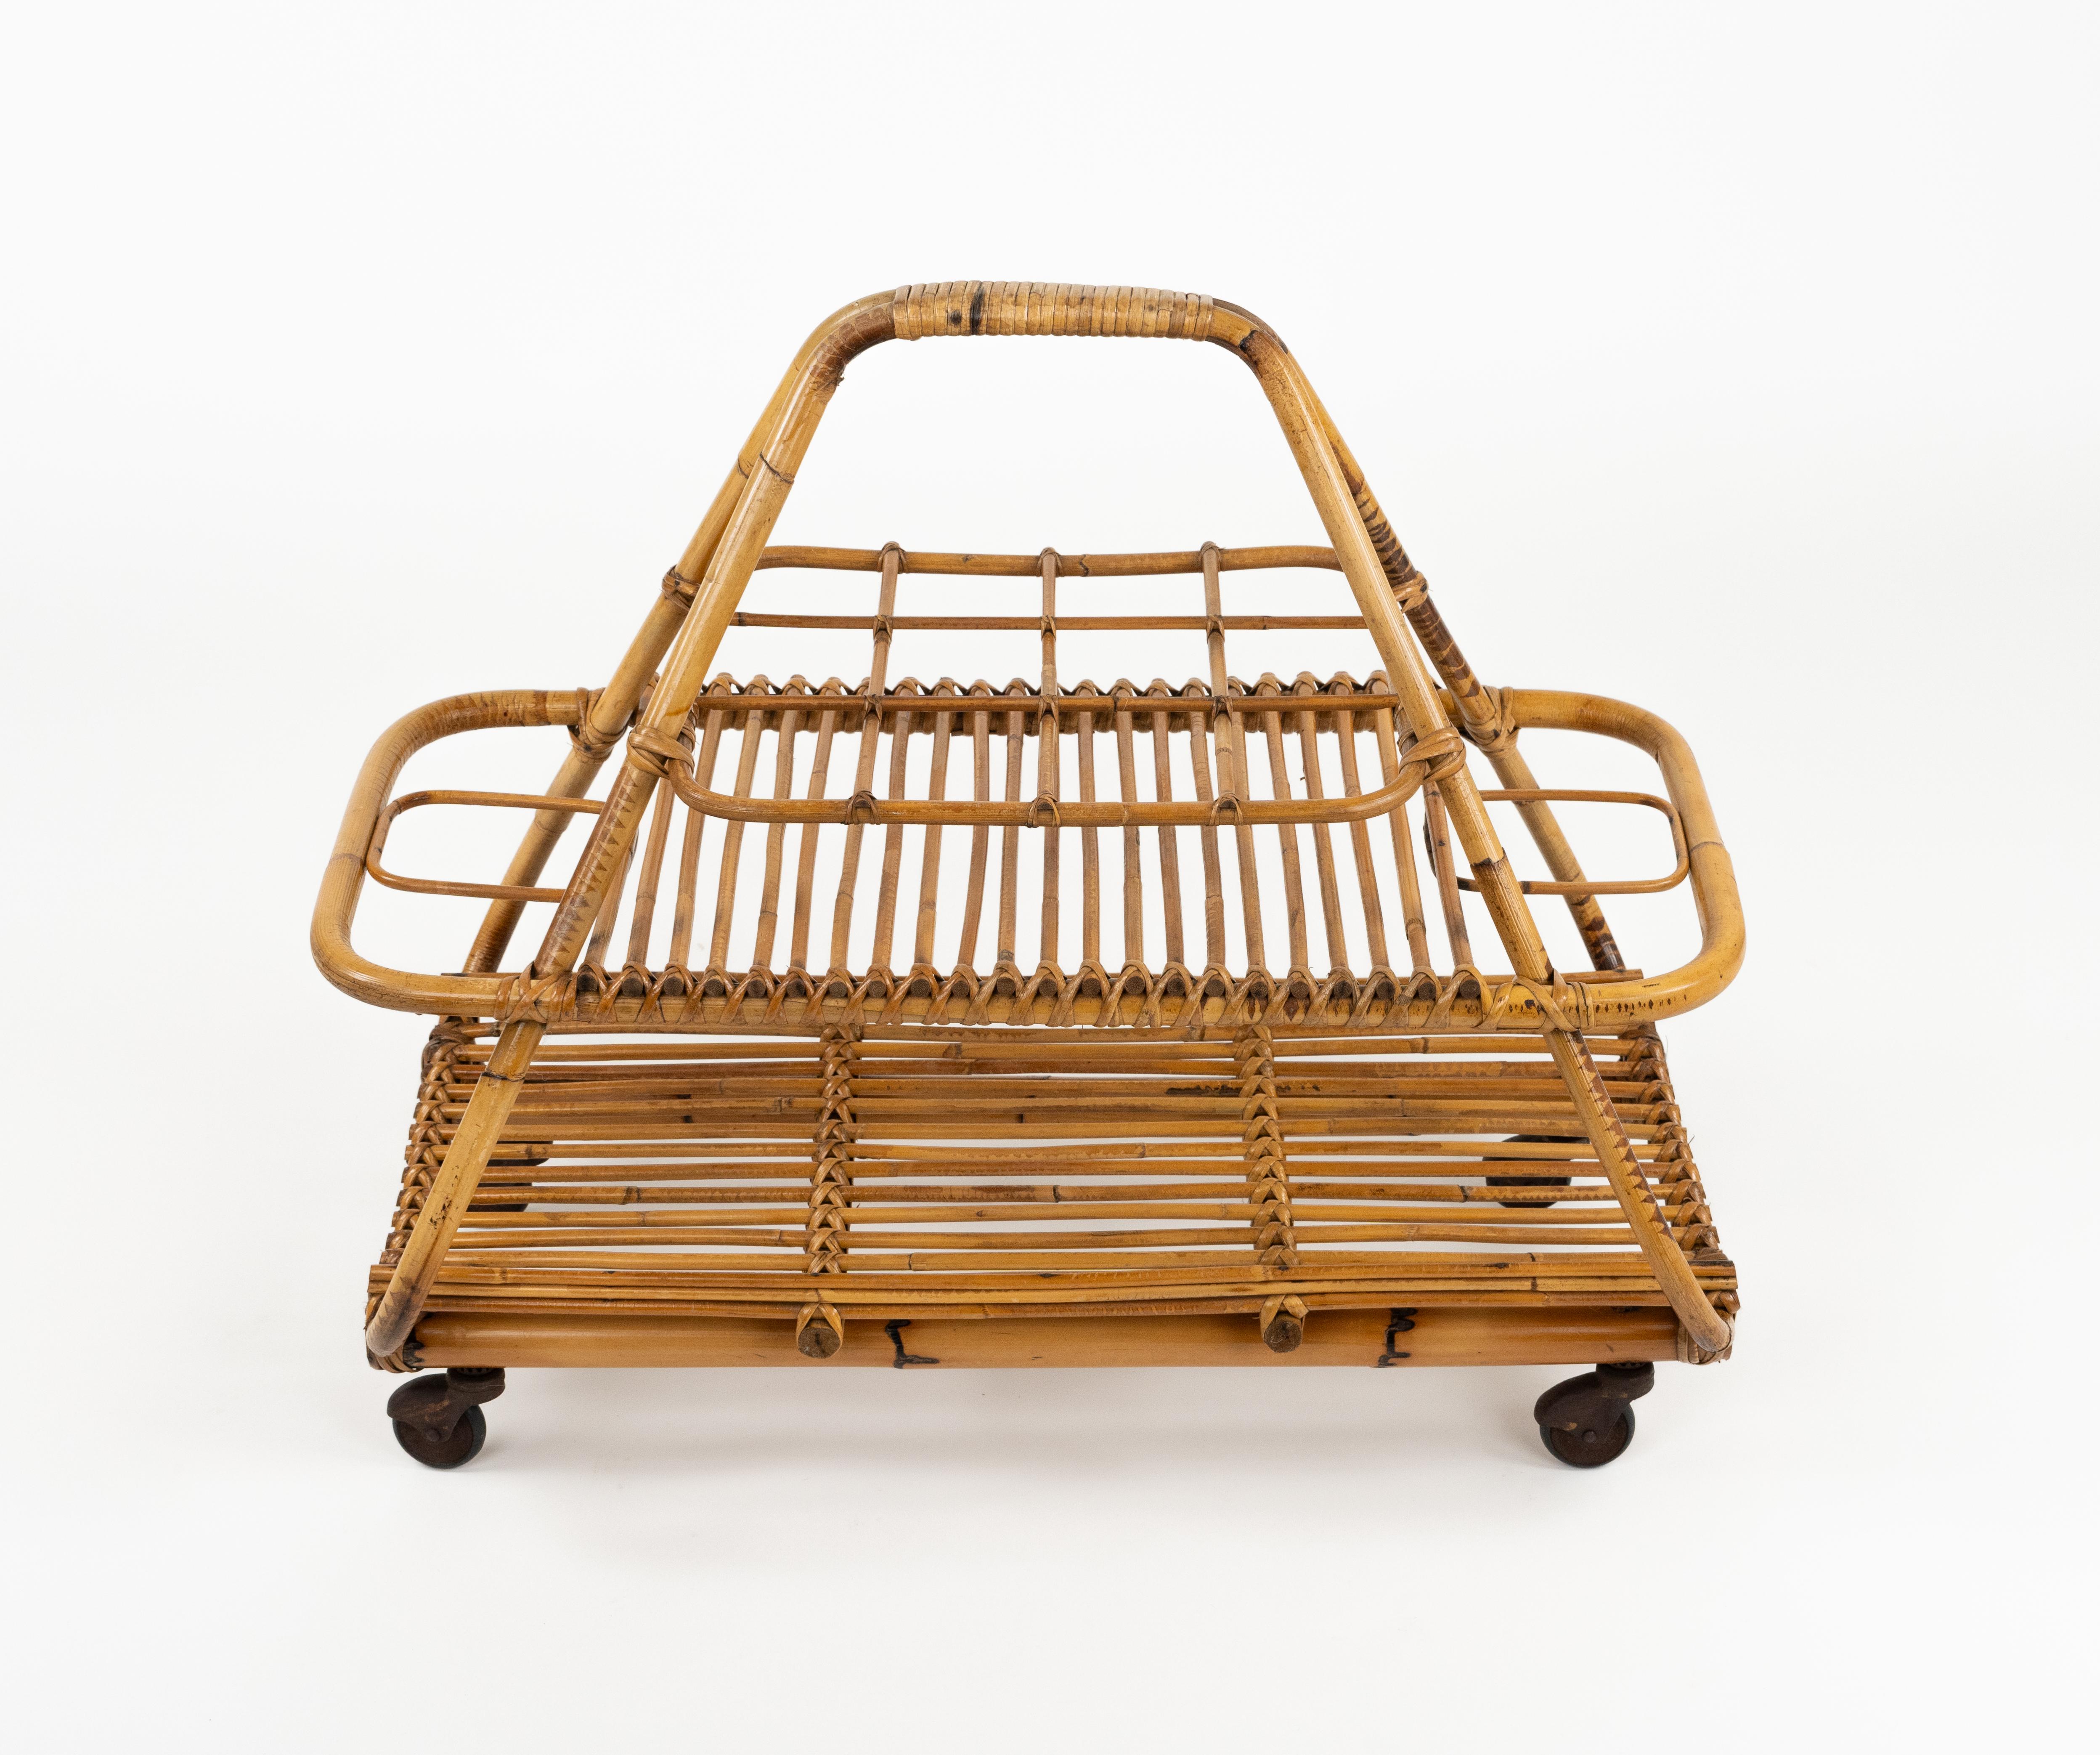 Midcentury Serving Bar Cart with bottle holder in Rattan and Bamboo, Italy 1960s For Sale 4